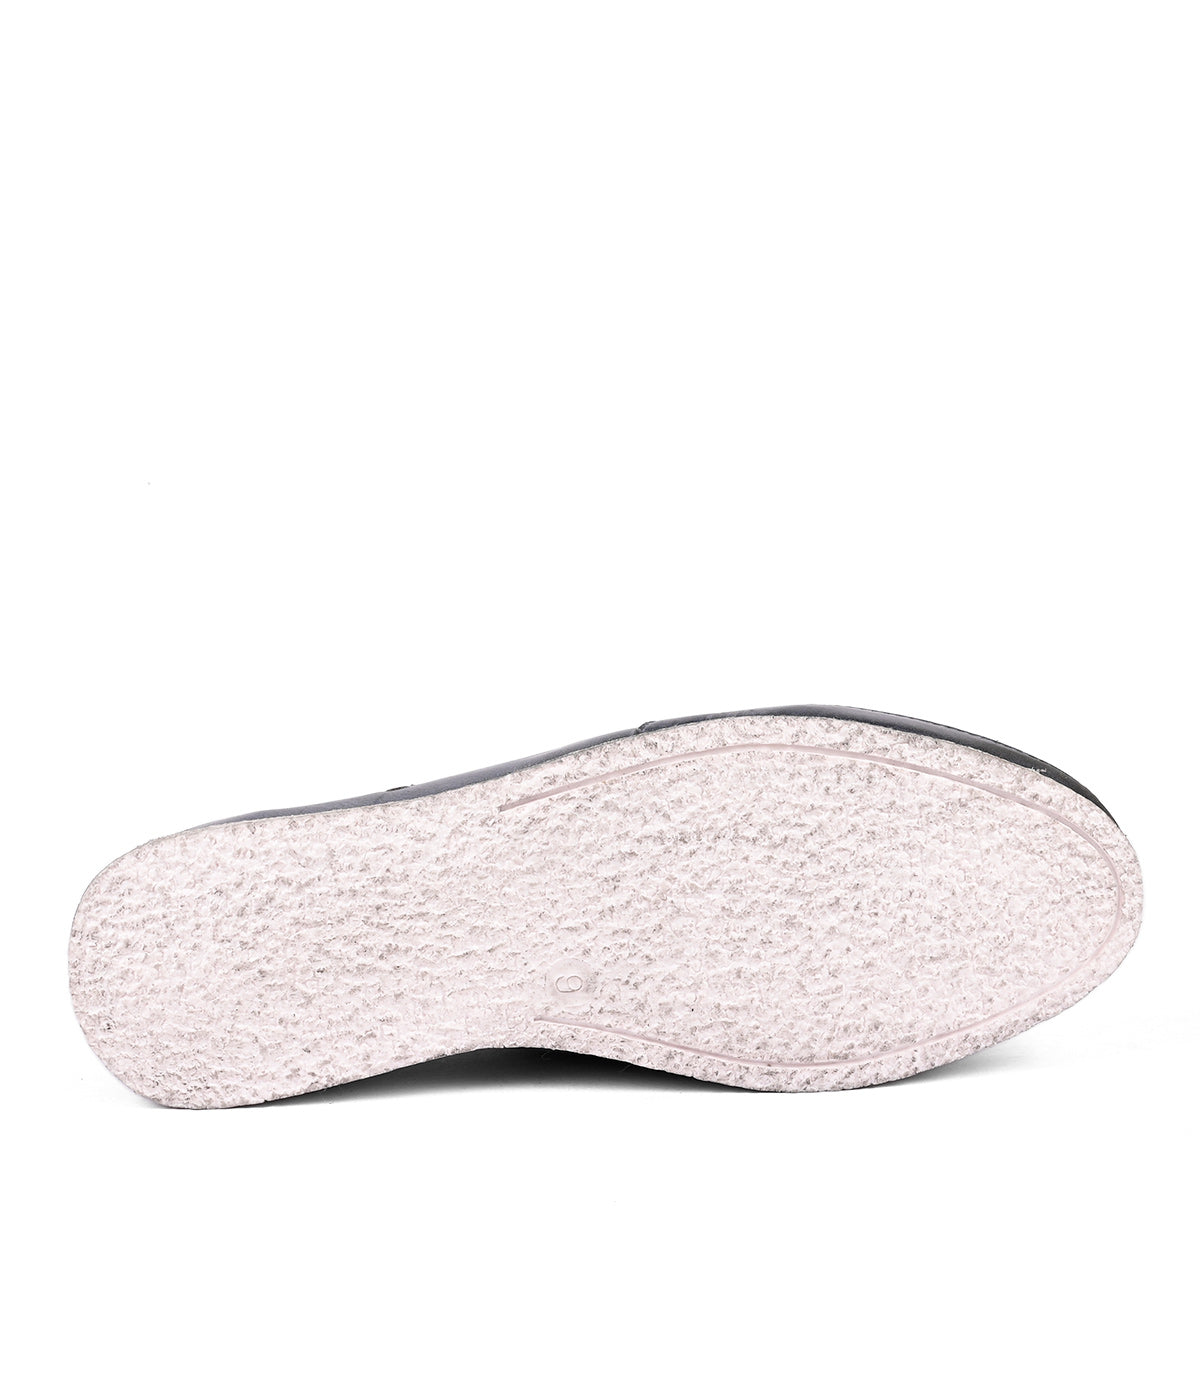 
                  
                    The sole of a Roan Shevon leather slip-on shoe against a white background.
                  
                